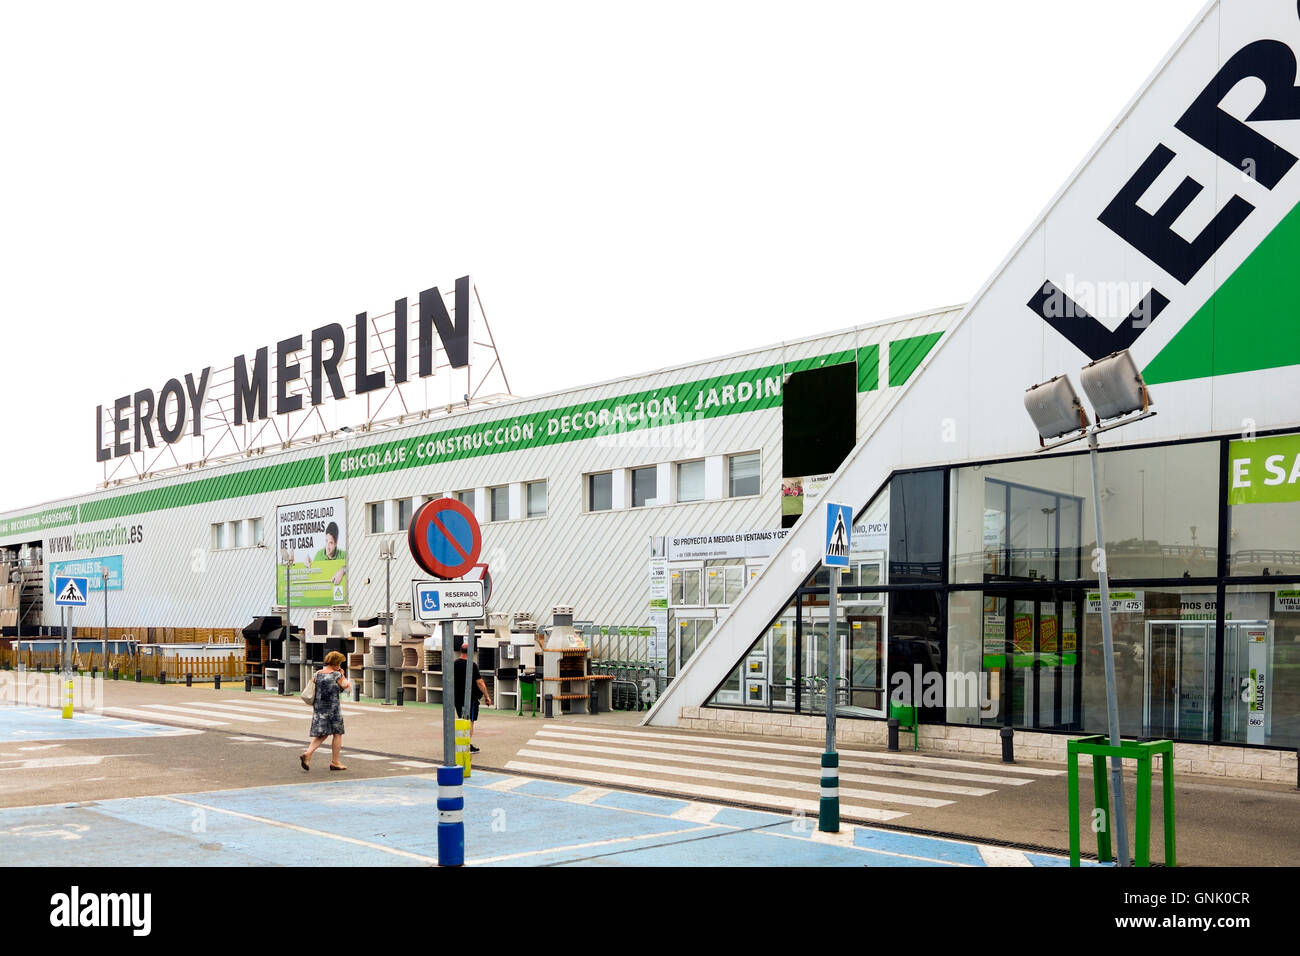 Entrance Leroy Merlin retail chain store, DIY products